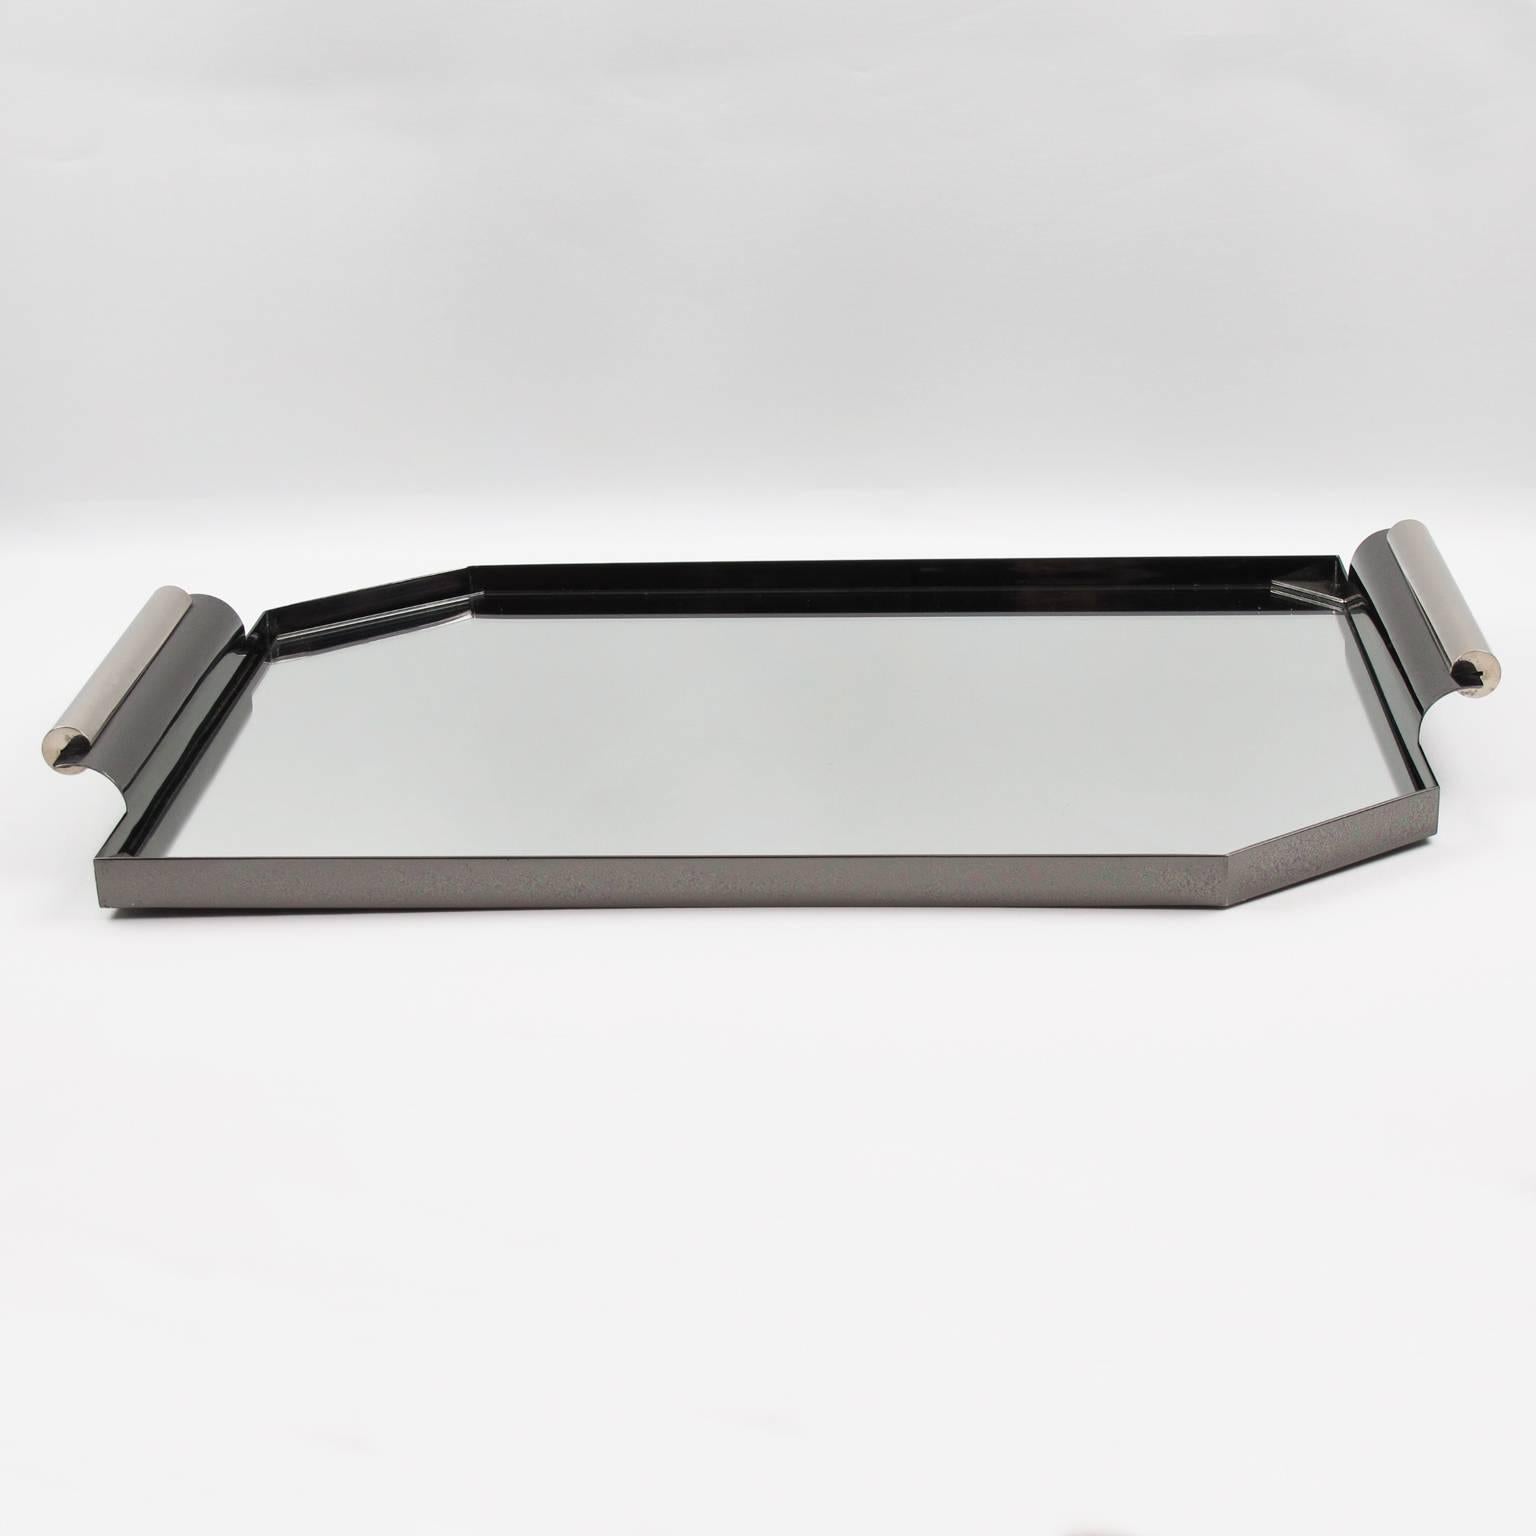 Unusual modernist cocktail serving tray from France, circa 1940s. Machine Age Industrial design with rectangular shape and cut corners. Large asymmetric handles. Rare chromed metal with original silver and black patina. Excellent vintage